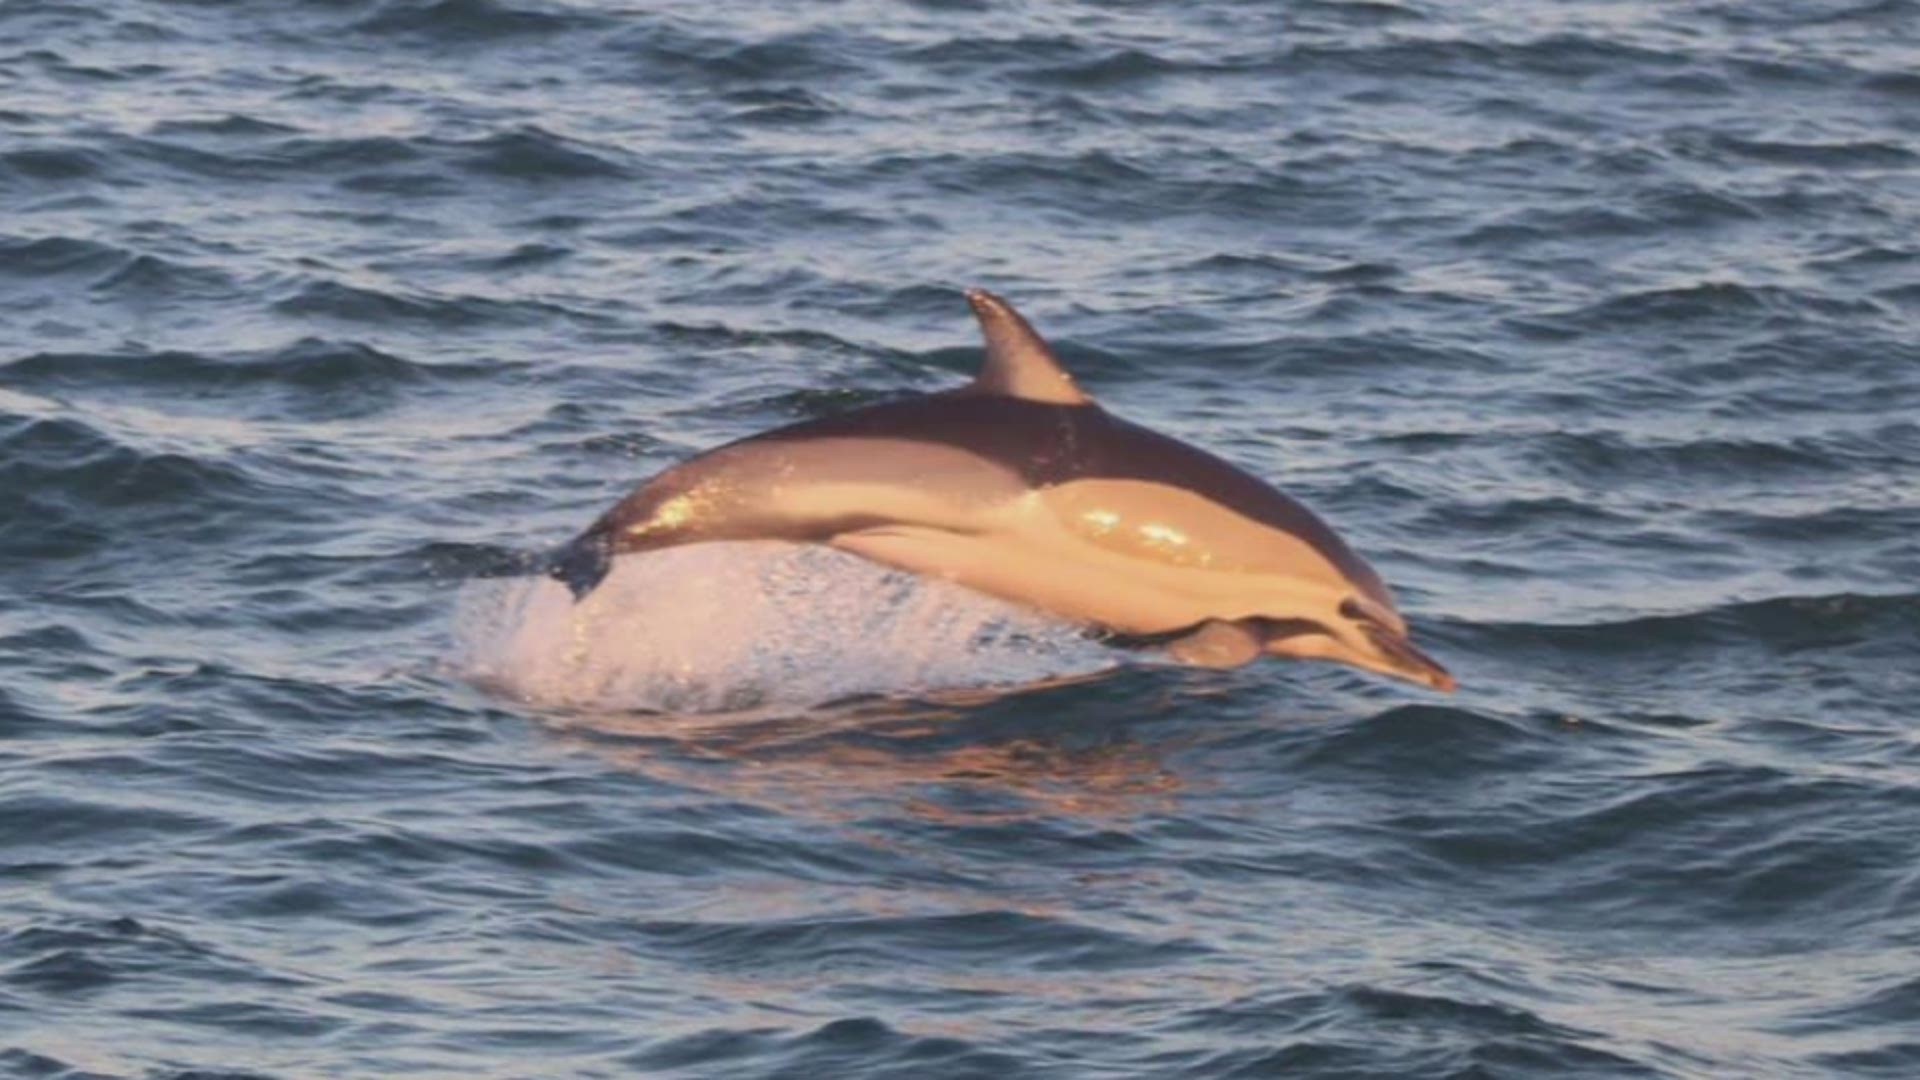 People on one marine life tour in Virginia Beach got quite a show as whales and dolphins surfaced on Feb. 9, 2020.